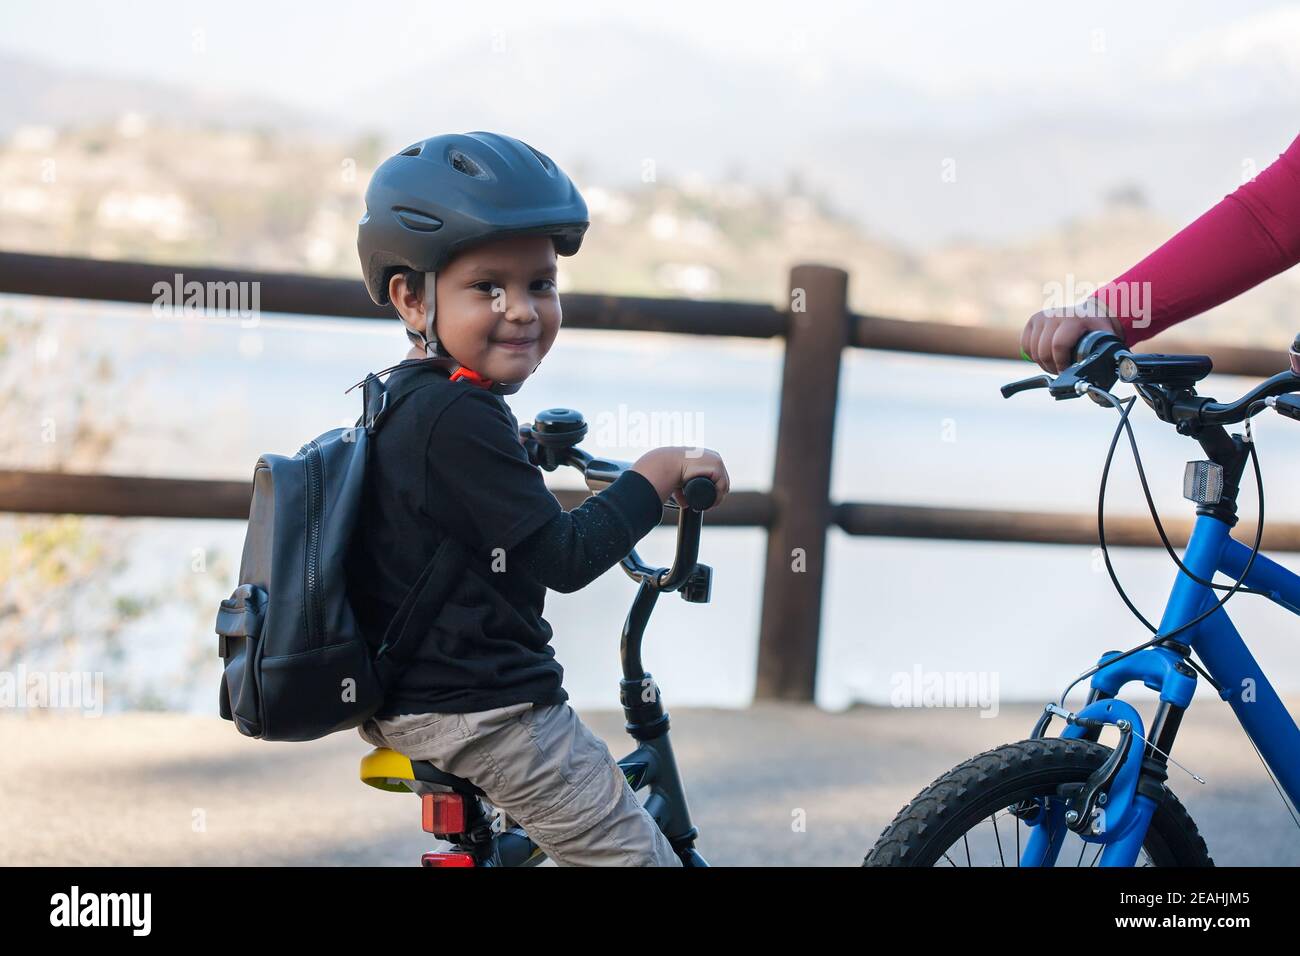 A Latino boy wearing a backpack and helmet on a small kids bike, learning to ride a bicycle by a lake and standing next to a larger mountain bike. Stock Photo